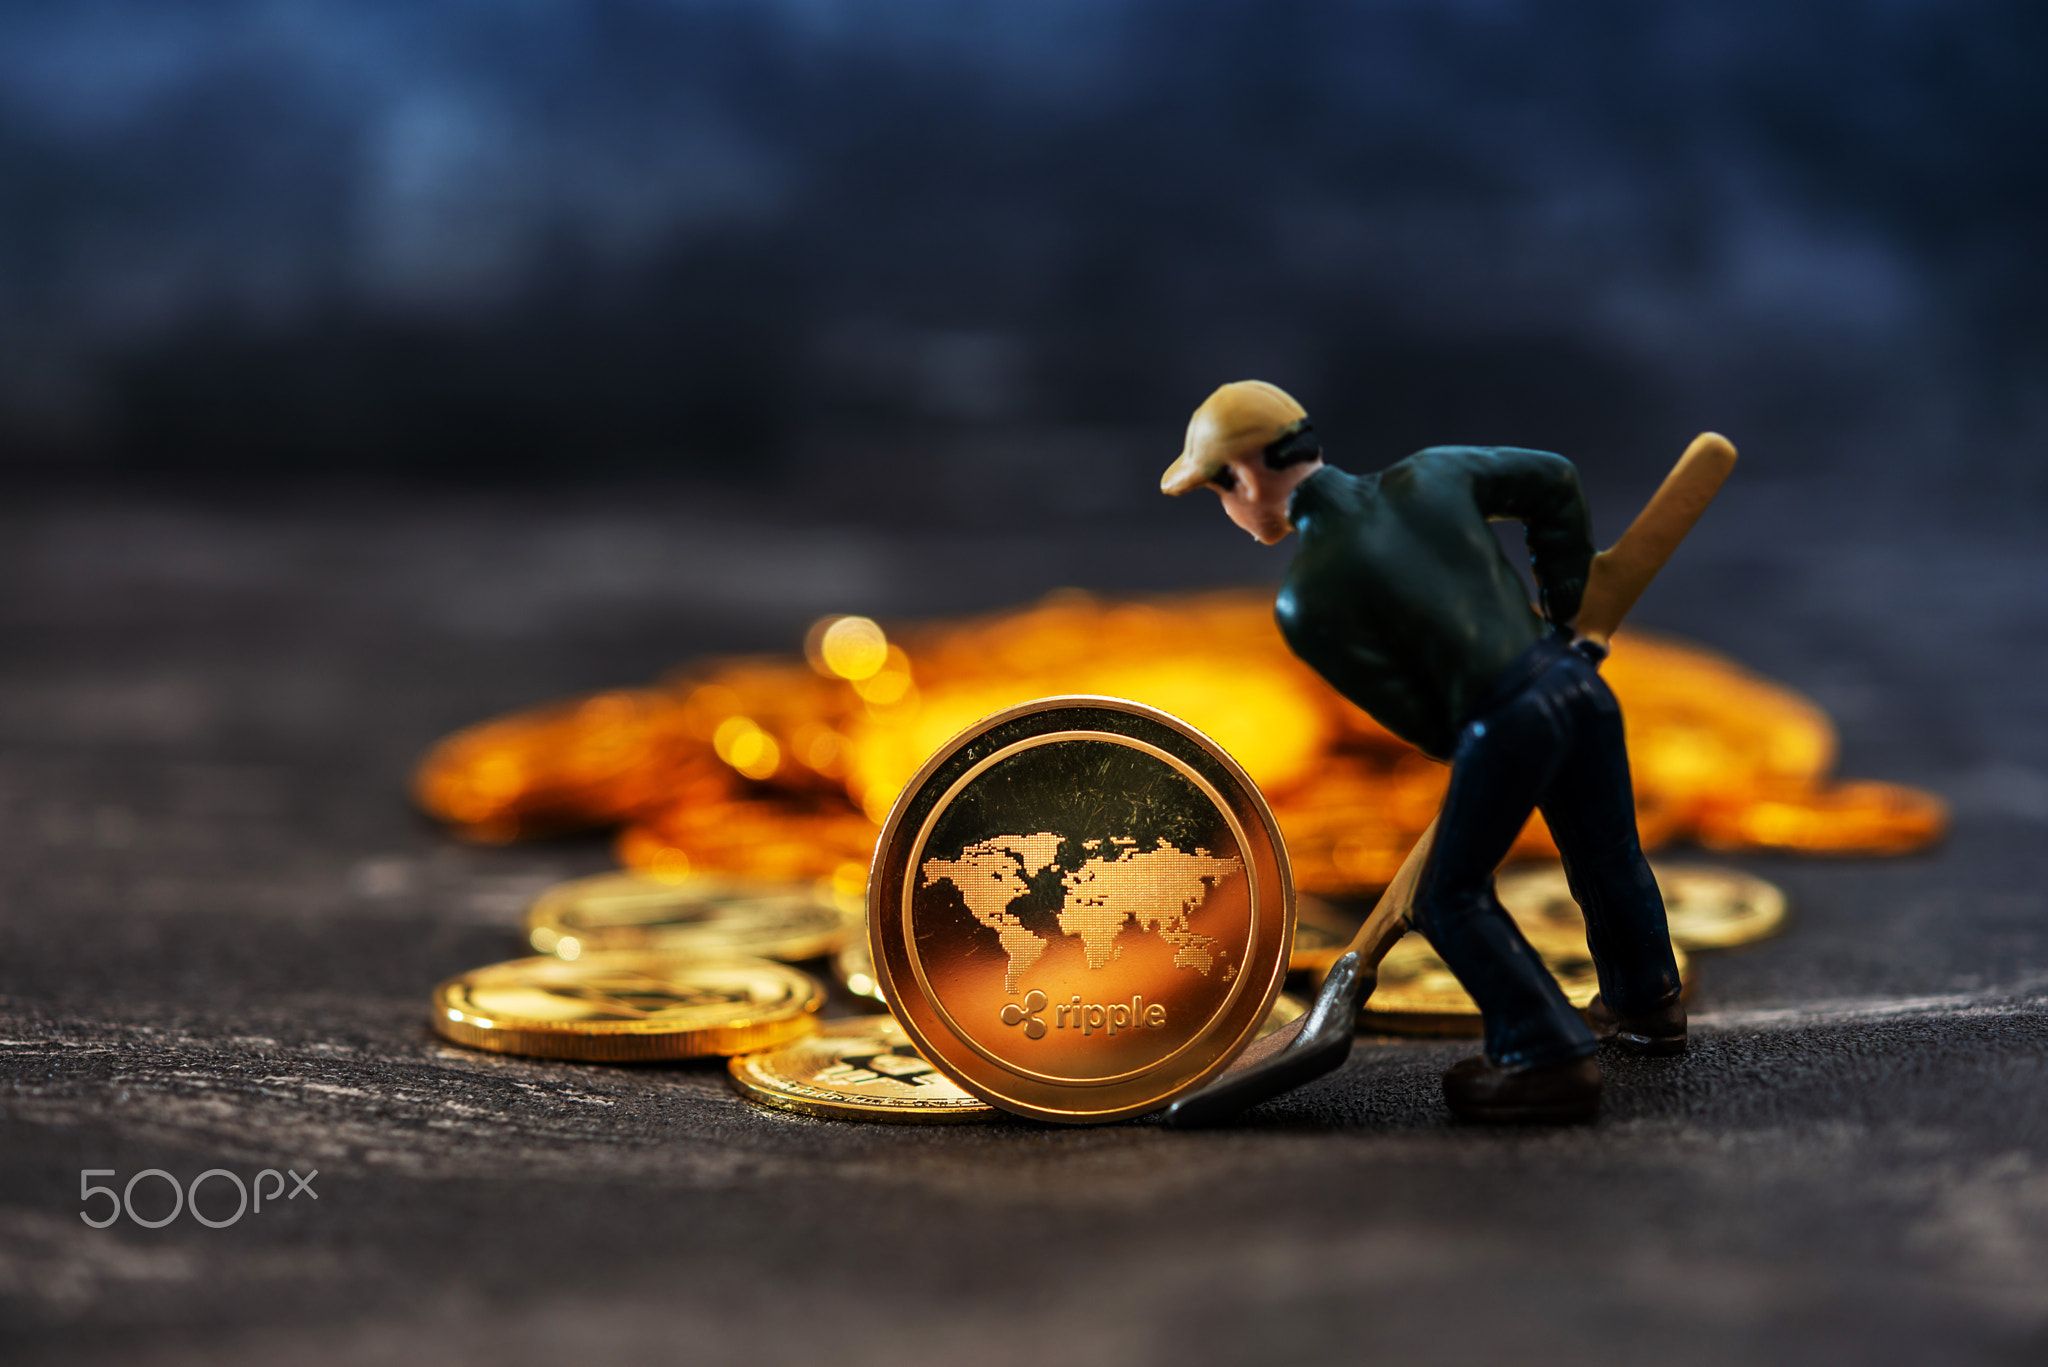 Miners are mining Ripple Coin digital currency